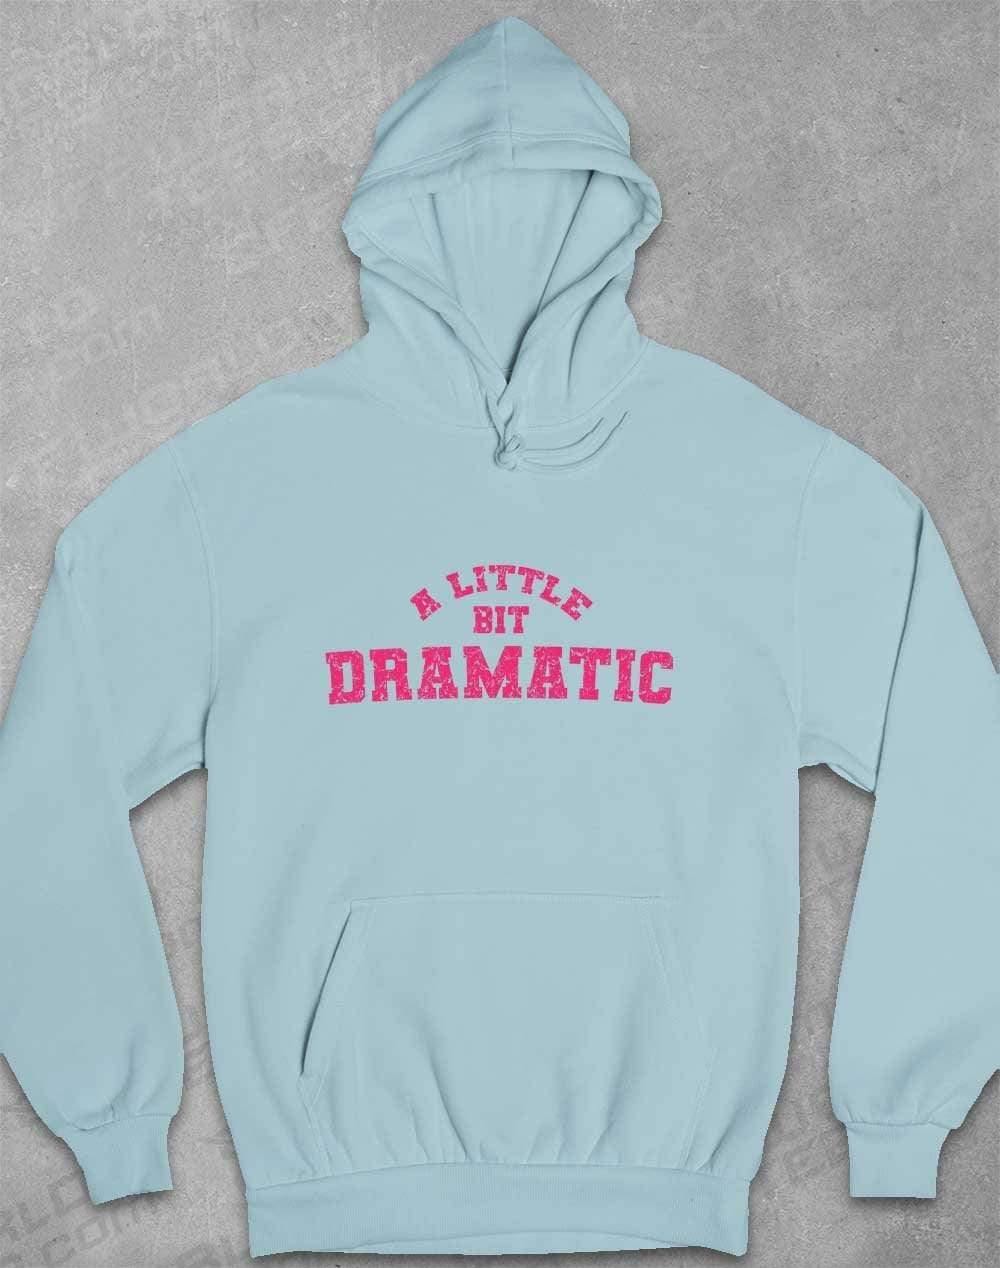 A Little Bit Dramatic Distressed Hoodie XS / Sky Blue  - Off World Tees